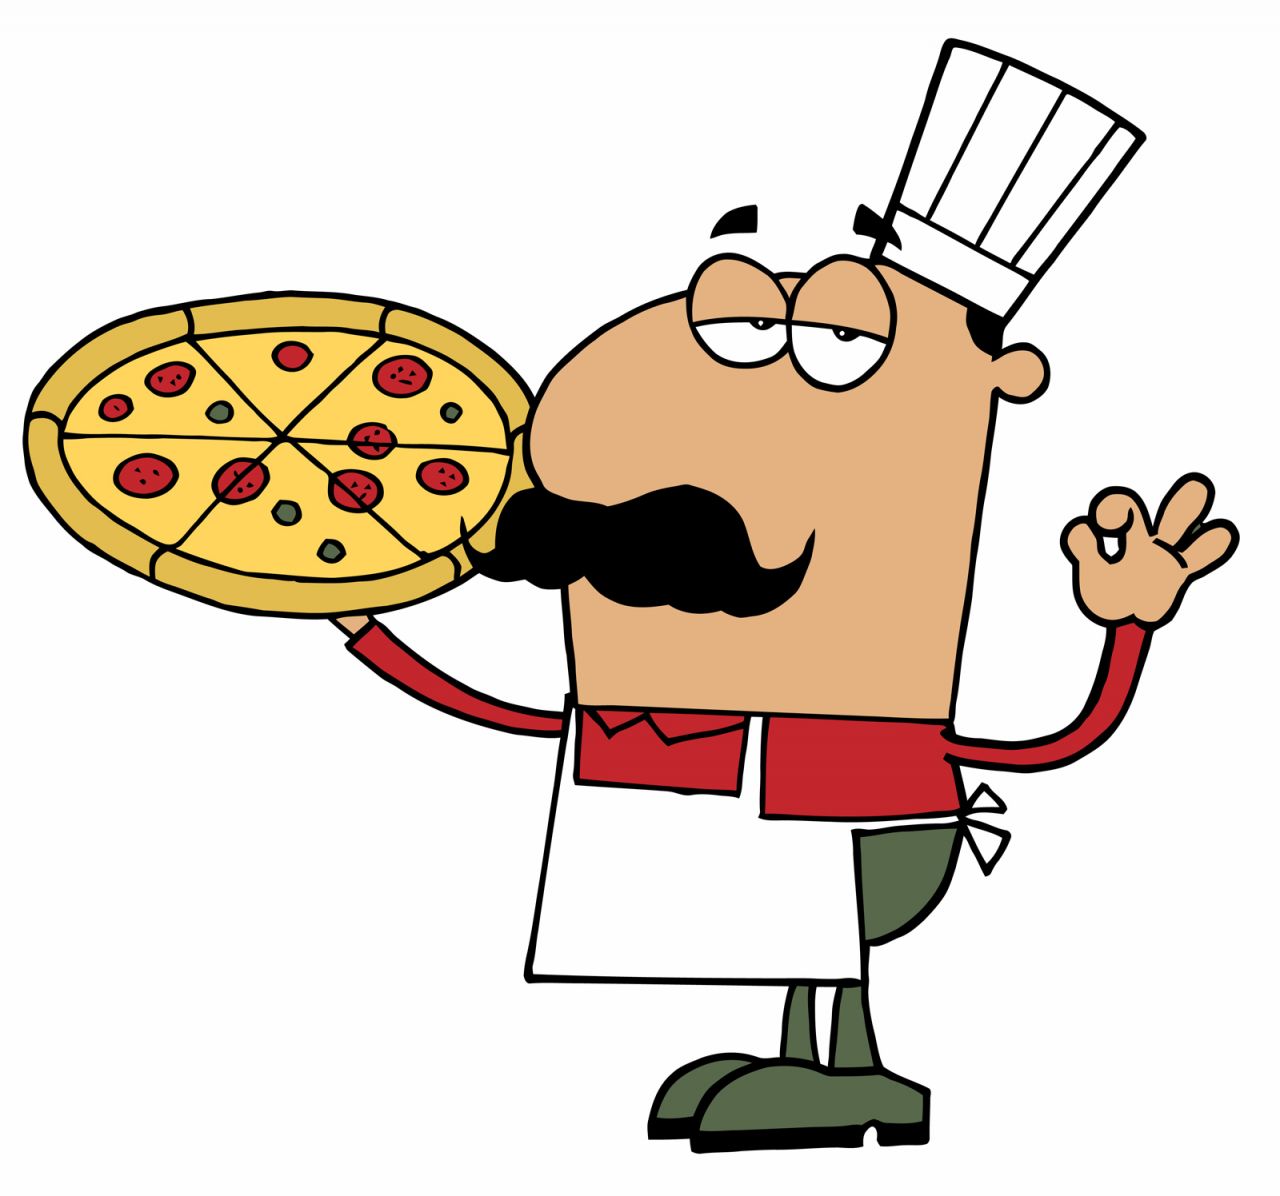 Funny Pizza clipart - Pizza cake clip art | DownloadClipart.org